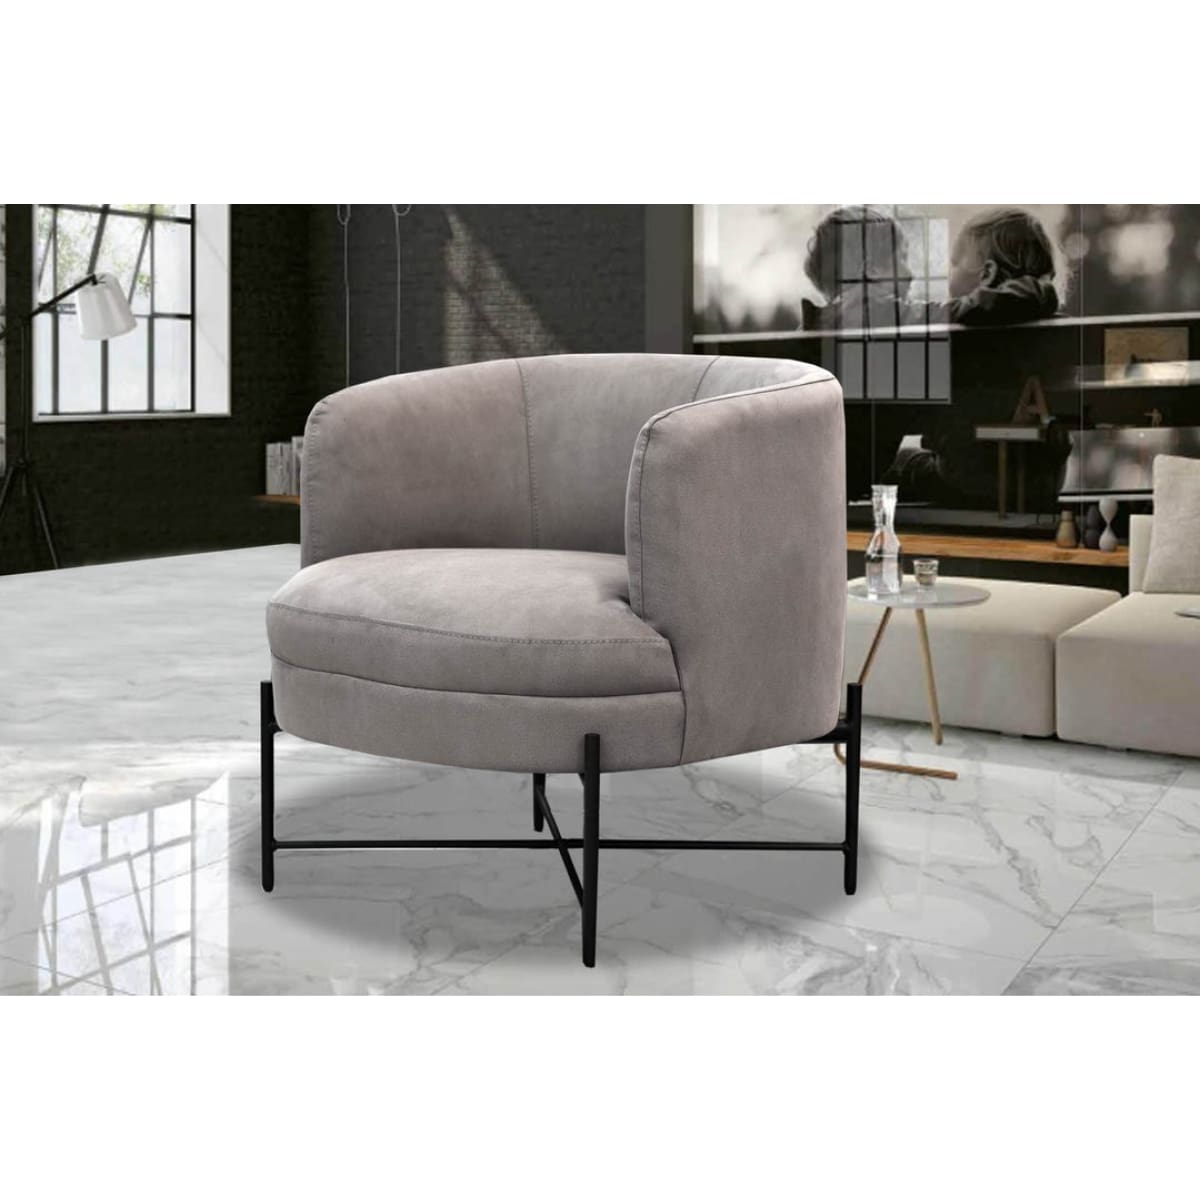 Cami Club Chair - Marbled Grey - lh-import-accent-club-chairs